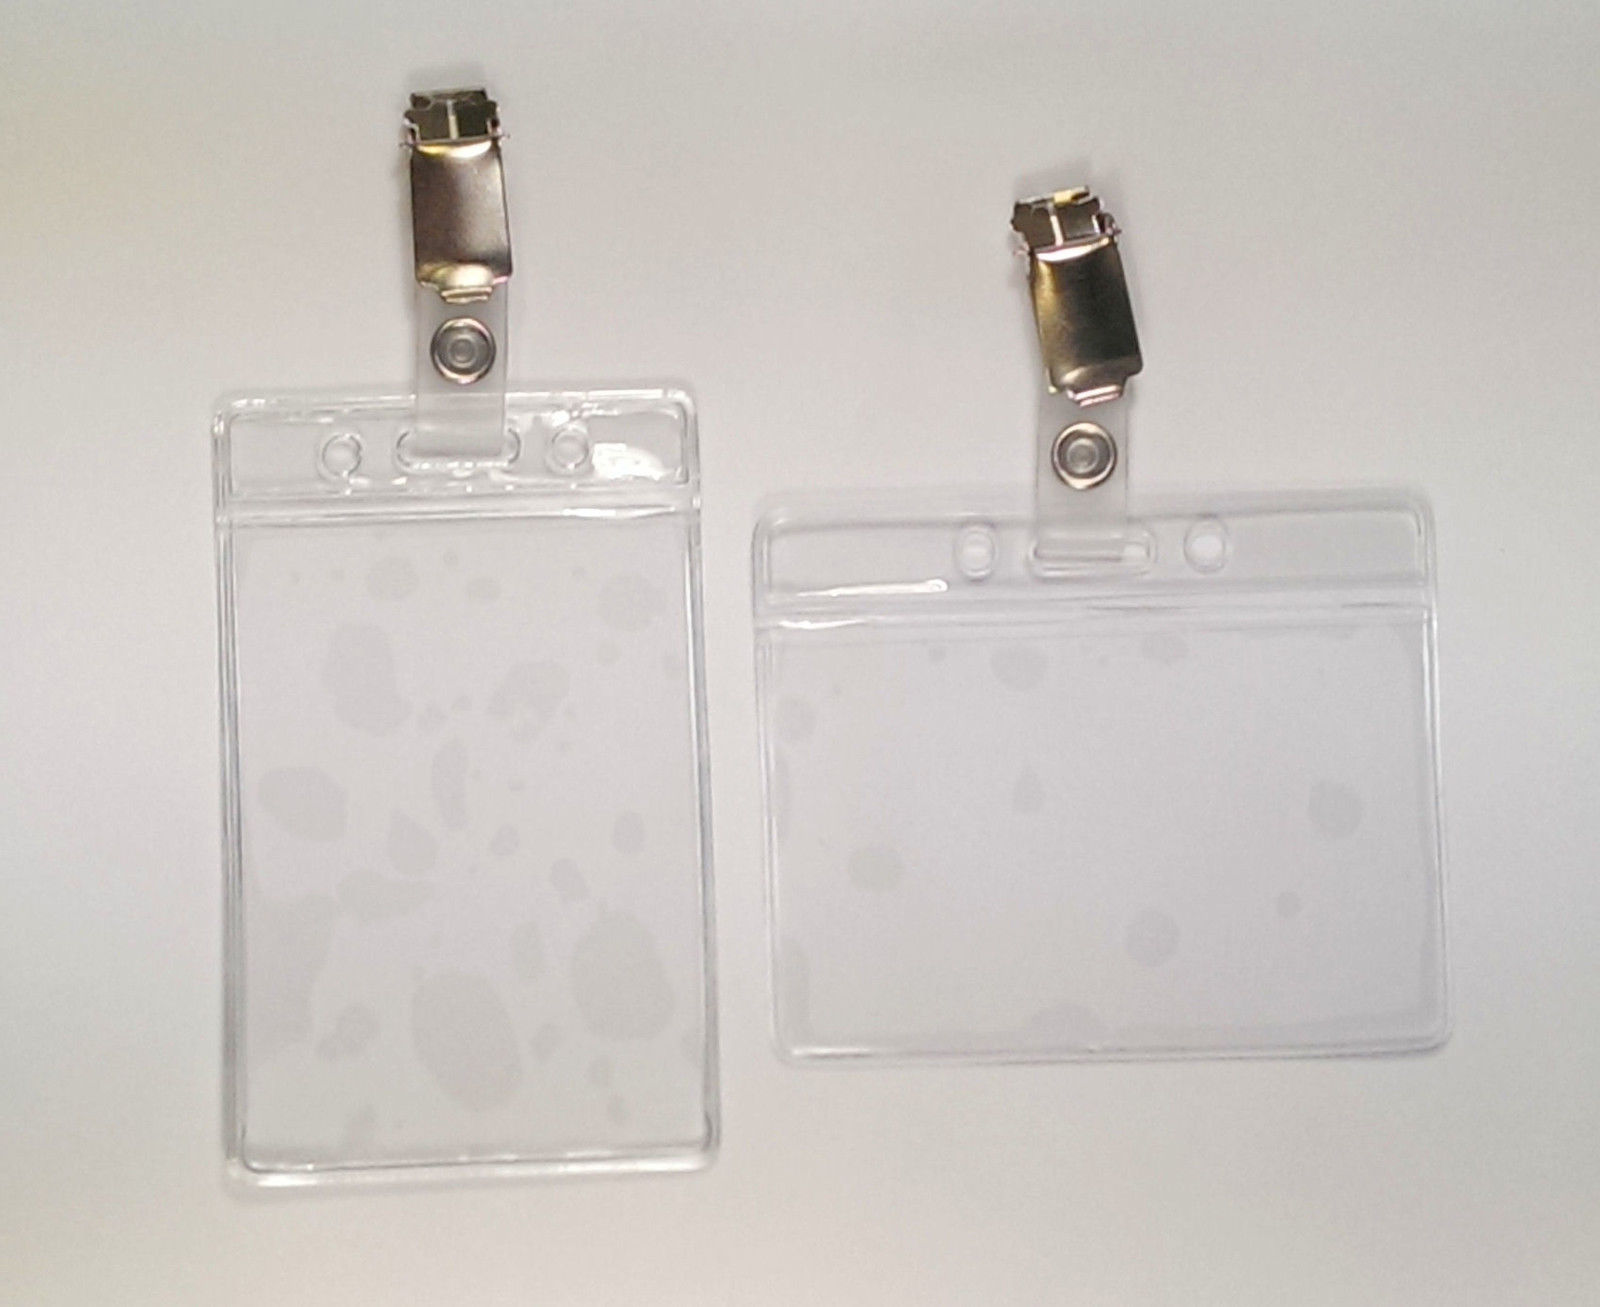 ID Badge Holders and ID Badge Accessories 